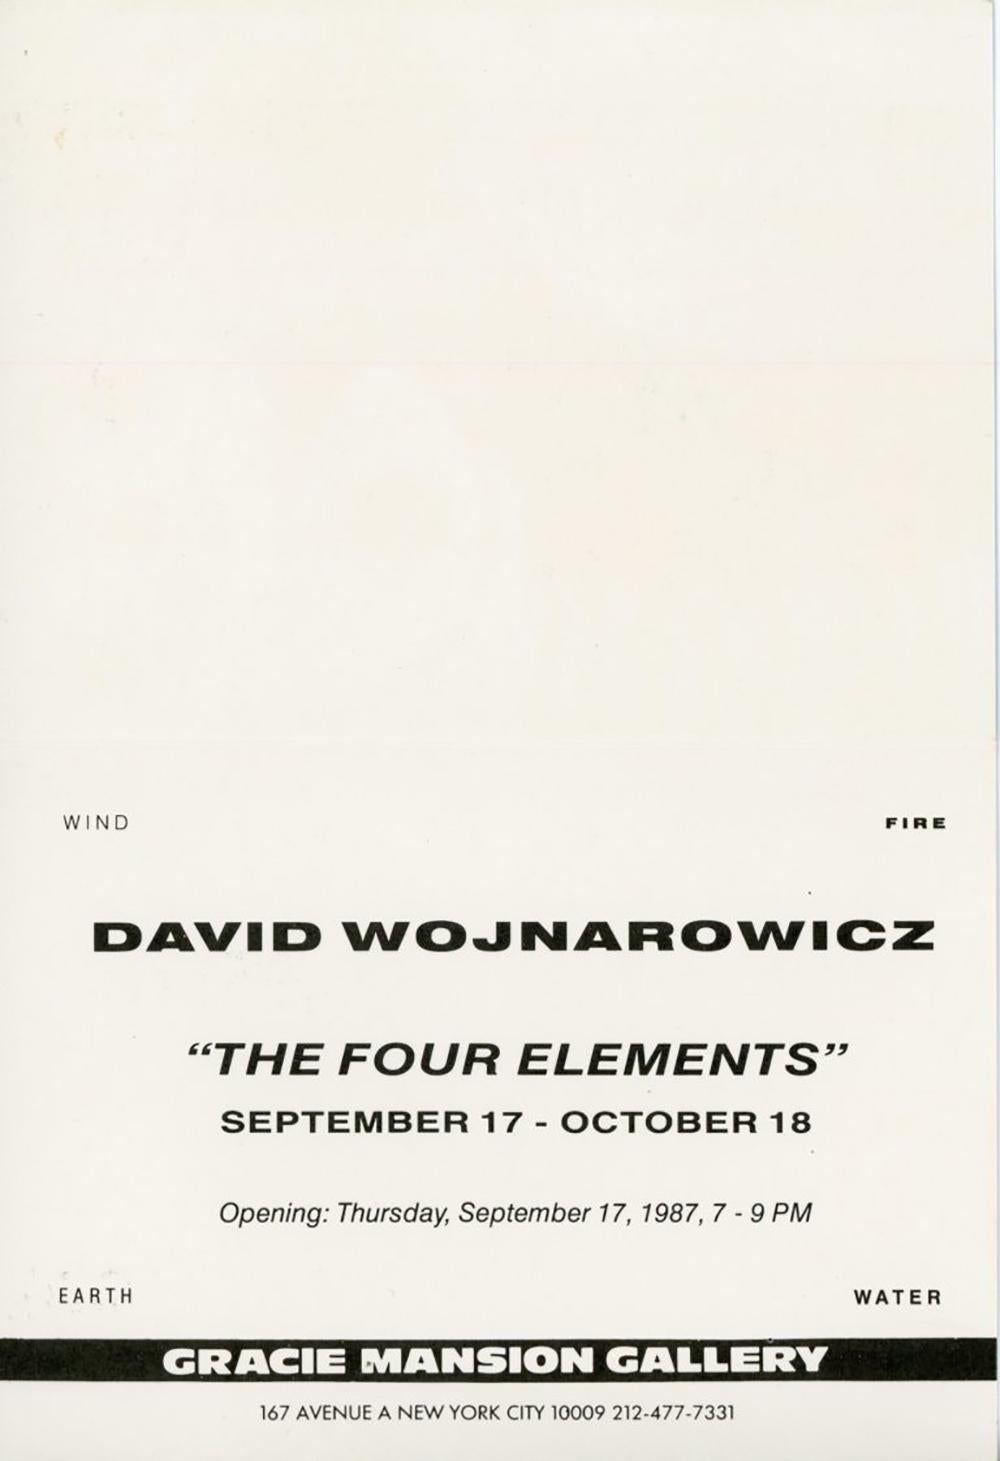 David Wojnarowicz’s The Four Elements at Gracie Mansion Gallery, New York, 1987. 

Offset printed announcement card; approximately 6x8 inches (folded closed).
Good overall vintage condition.
Unsigned from an edition of unknown.
Front image: David